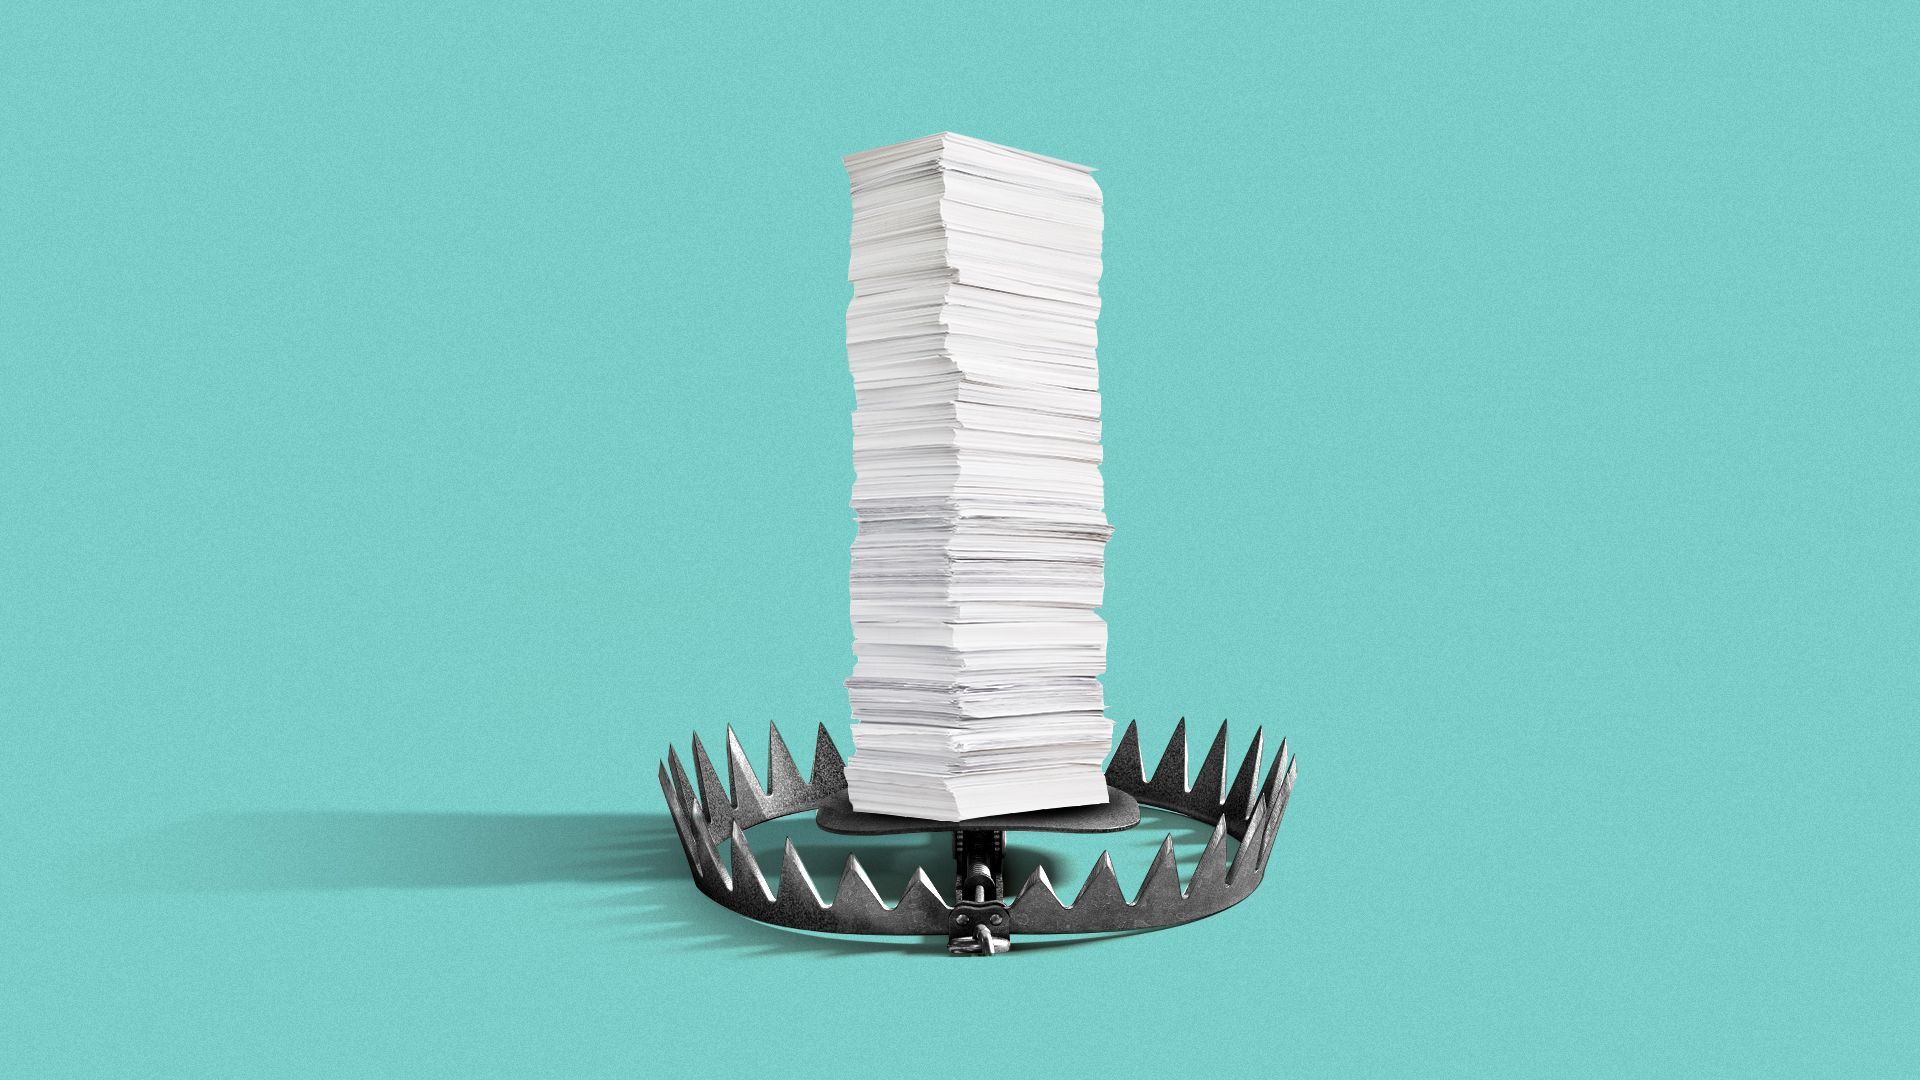 Illustration of a stack of paper inside of a bear trap.